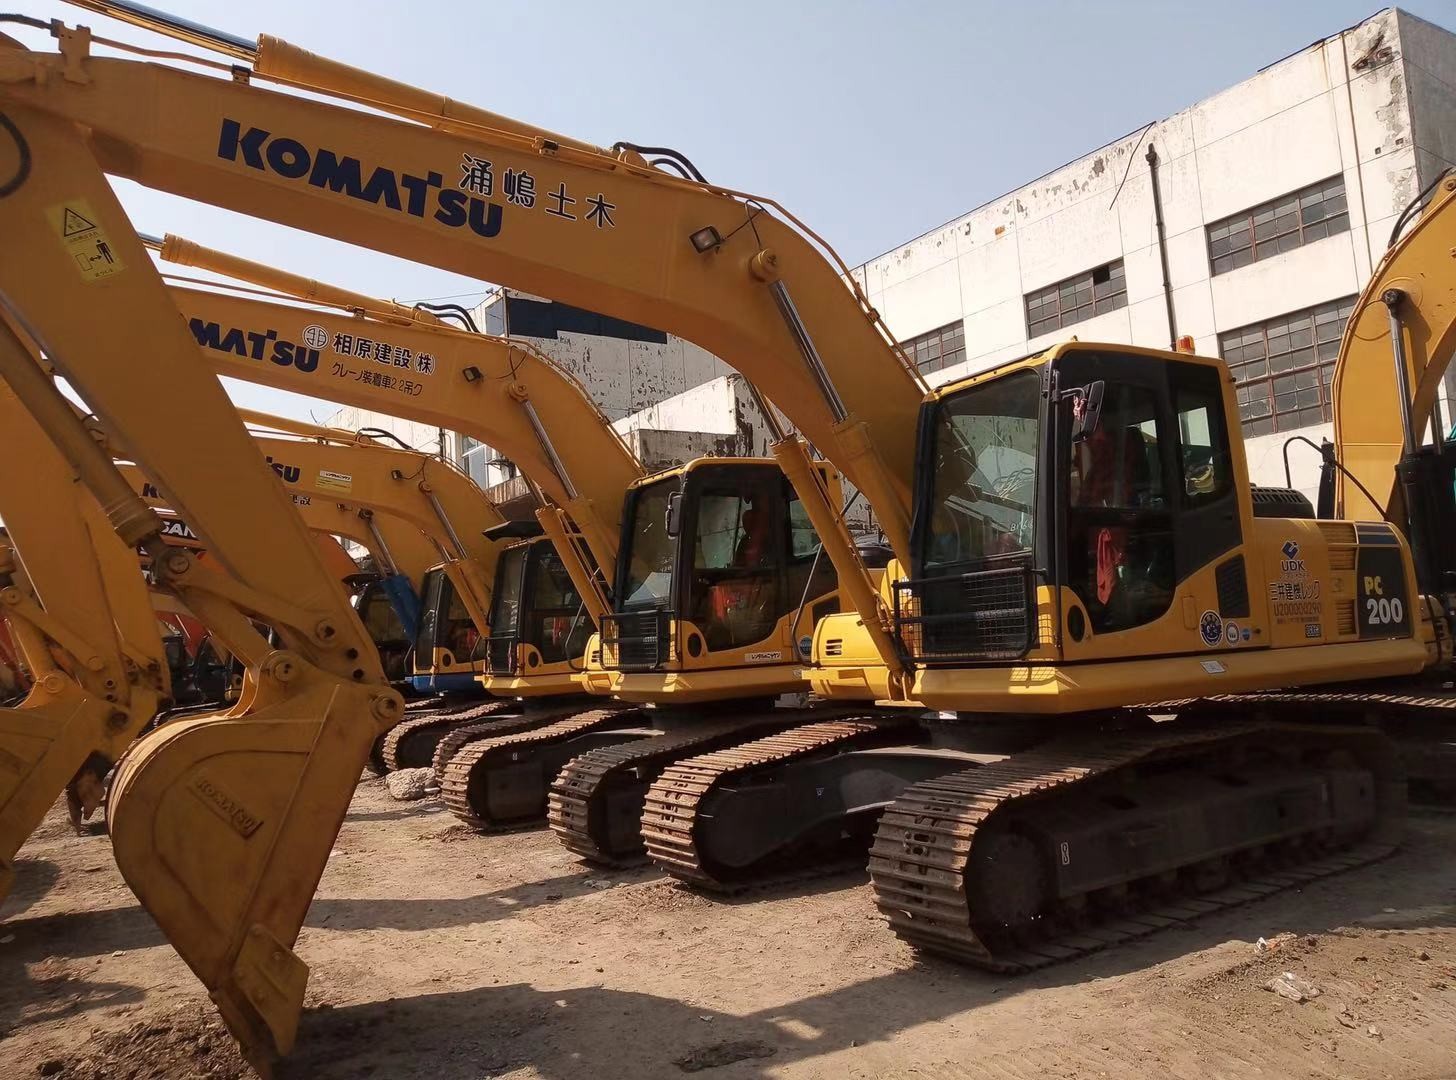 Quality Original Japan Used KOMATSU PC200-8 Crawler Excavator in excellent condition for sale